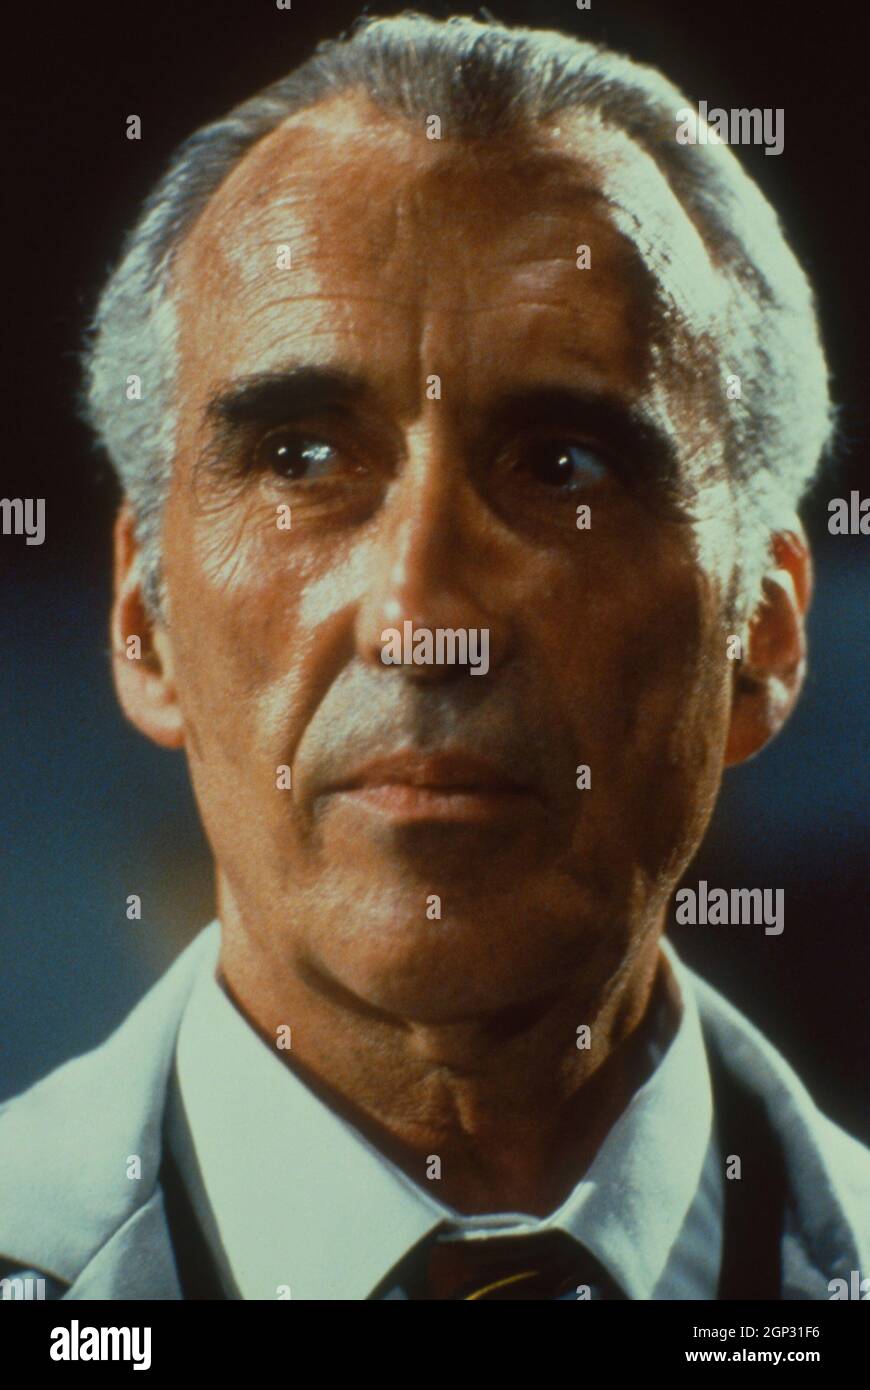 GREMLINS 2: THE NEW BATCH, Christopher Lee, 1990. © Warner Bros. / Courtesy  Everett Collection Stock Photo - Alamy